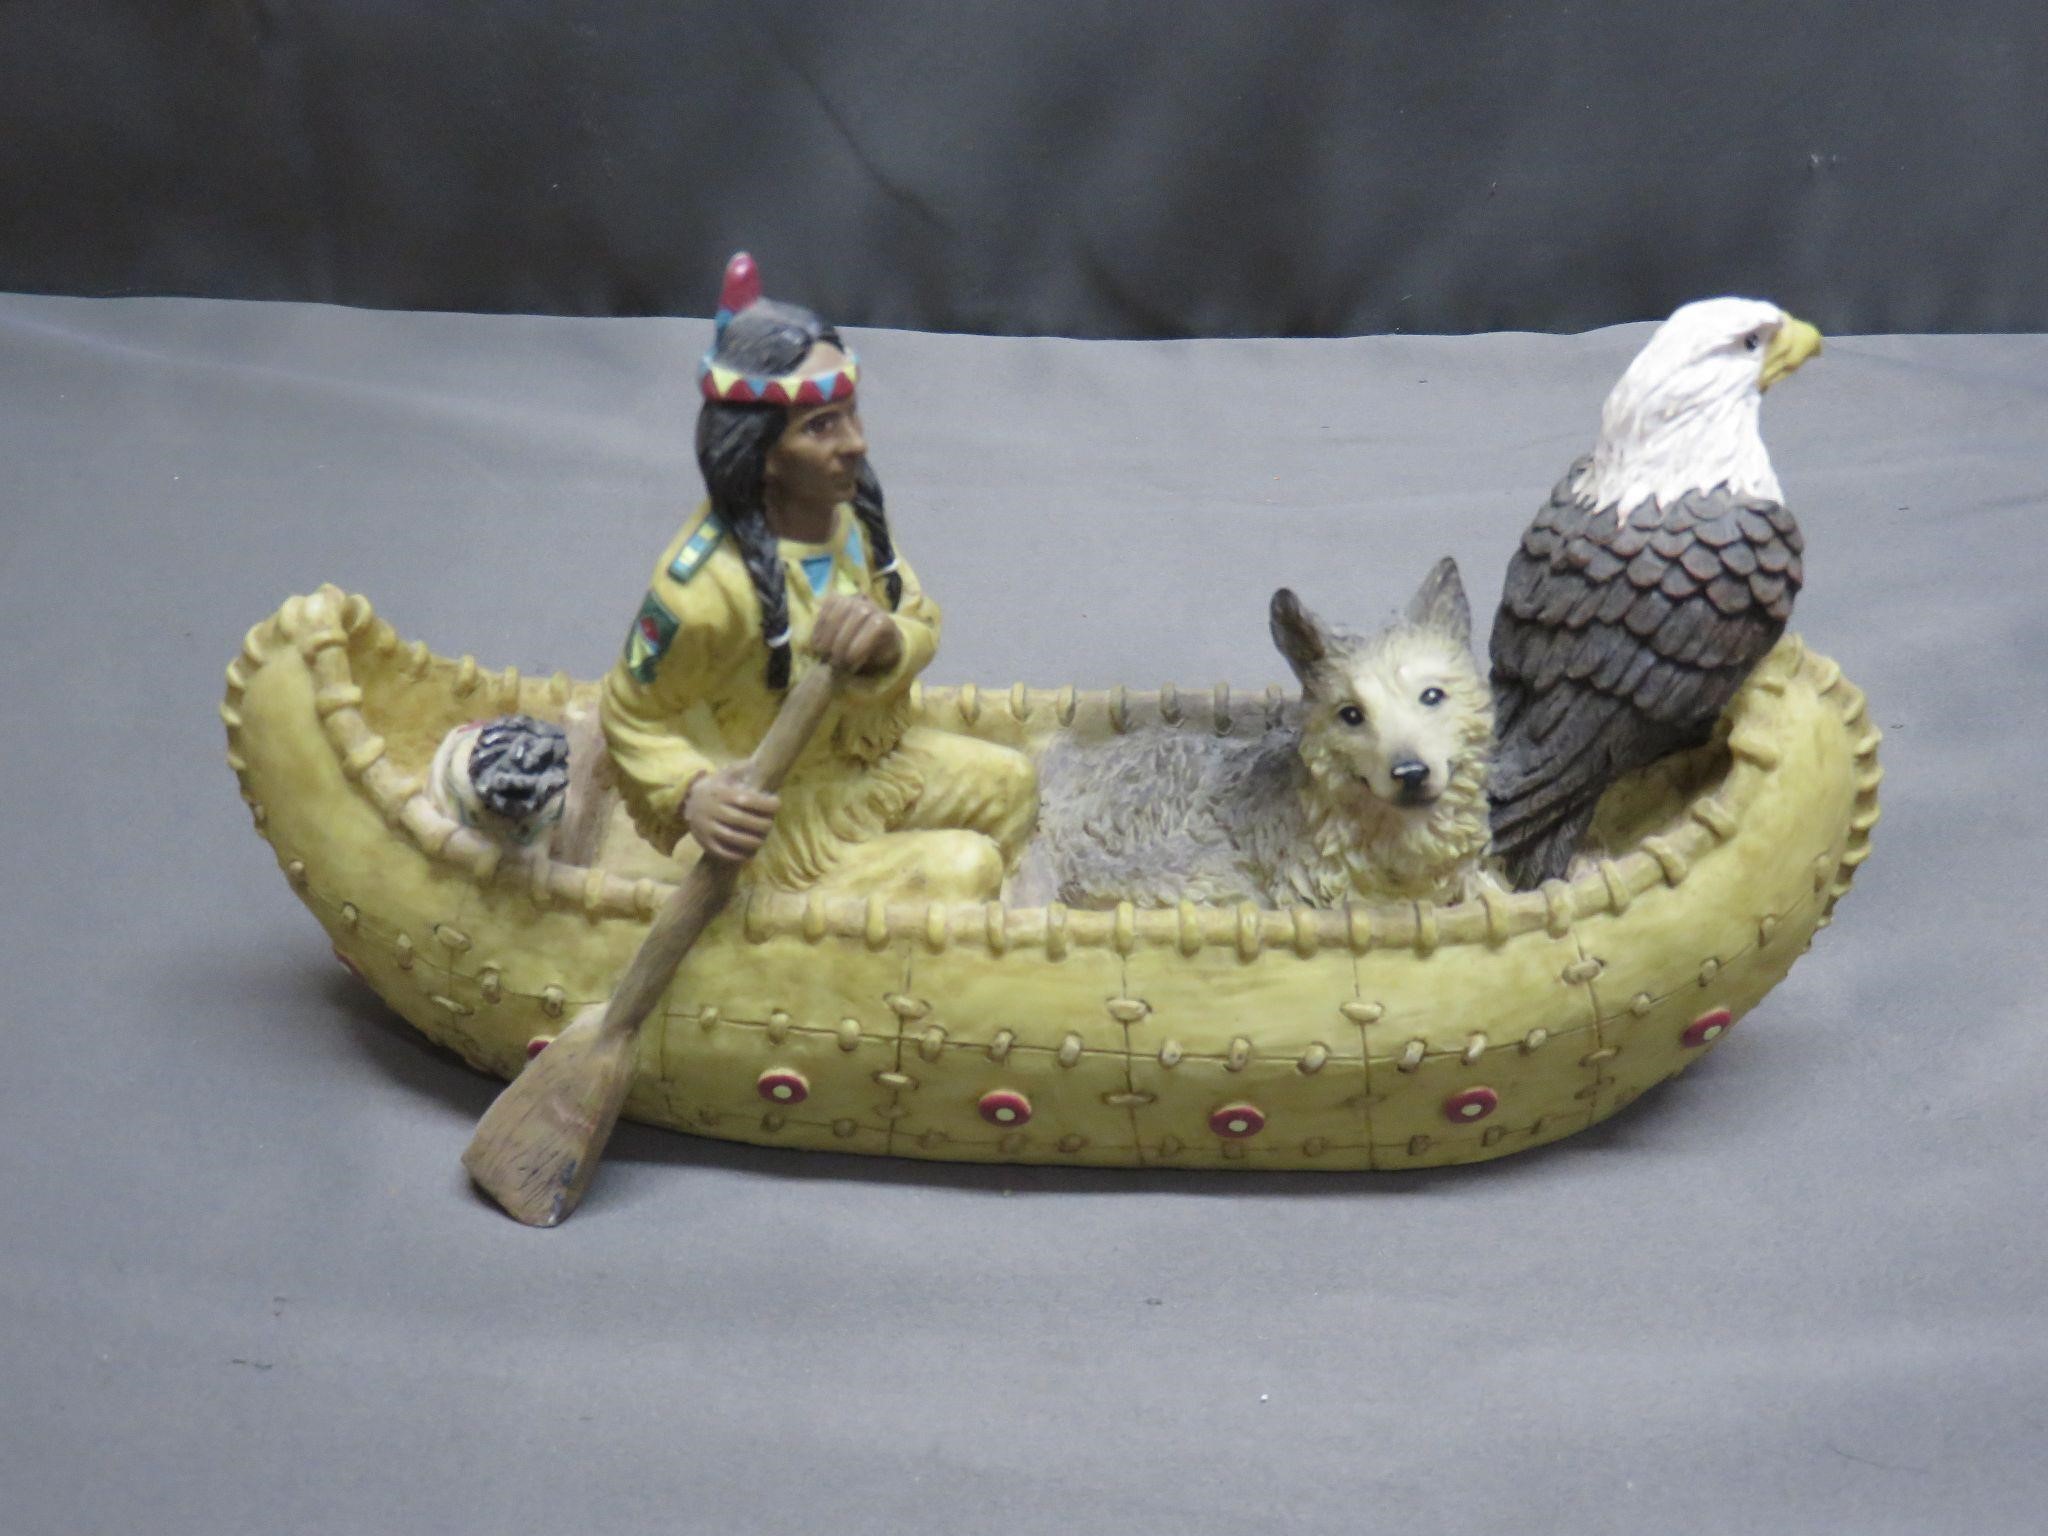 Indian on Canoe with Wolf and Eagle